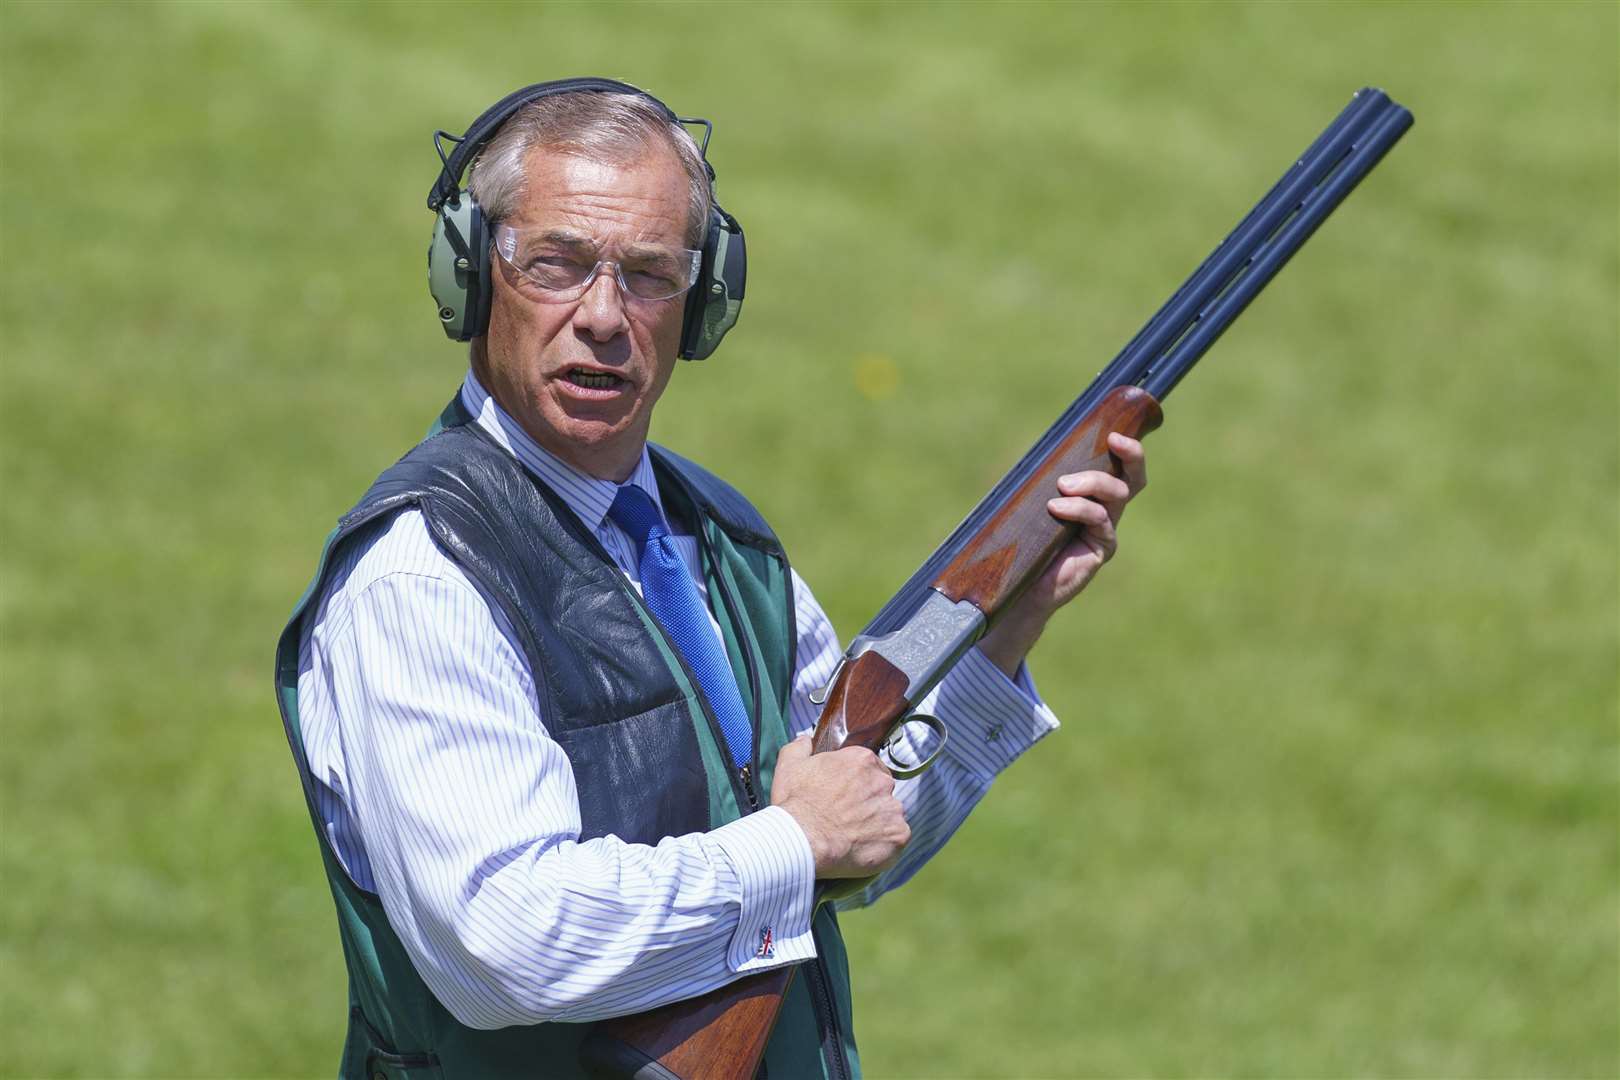 … before trying his hand at some clay pigeon shooting at the outdoor activity centre (Dominic Lipinski/PA)